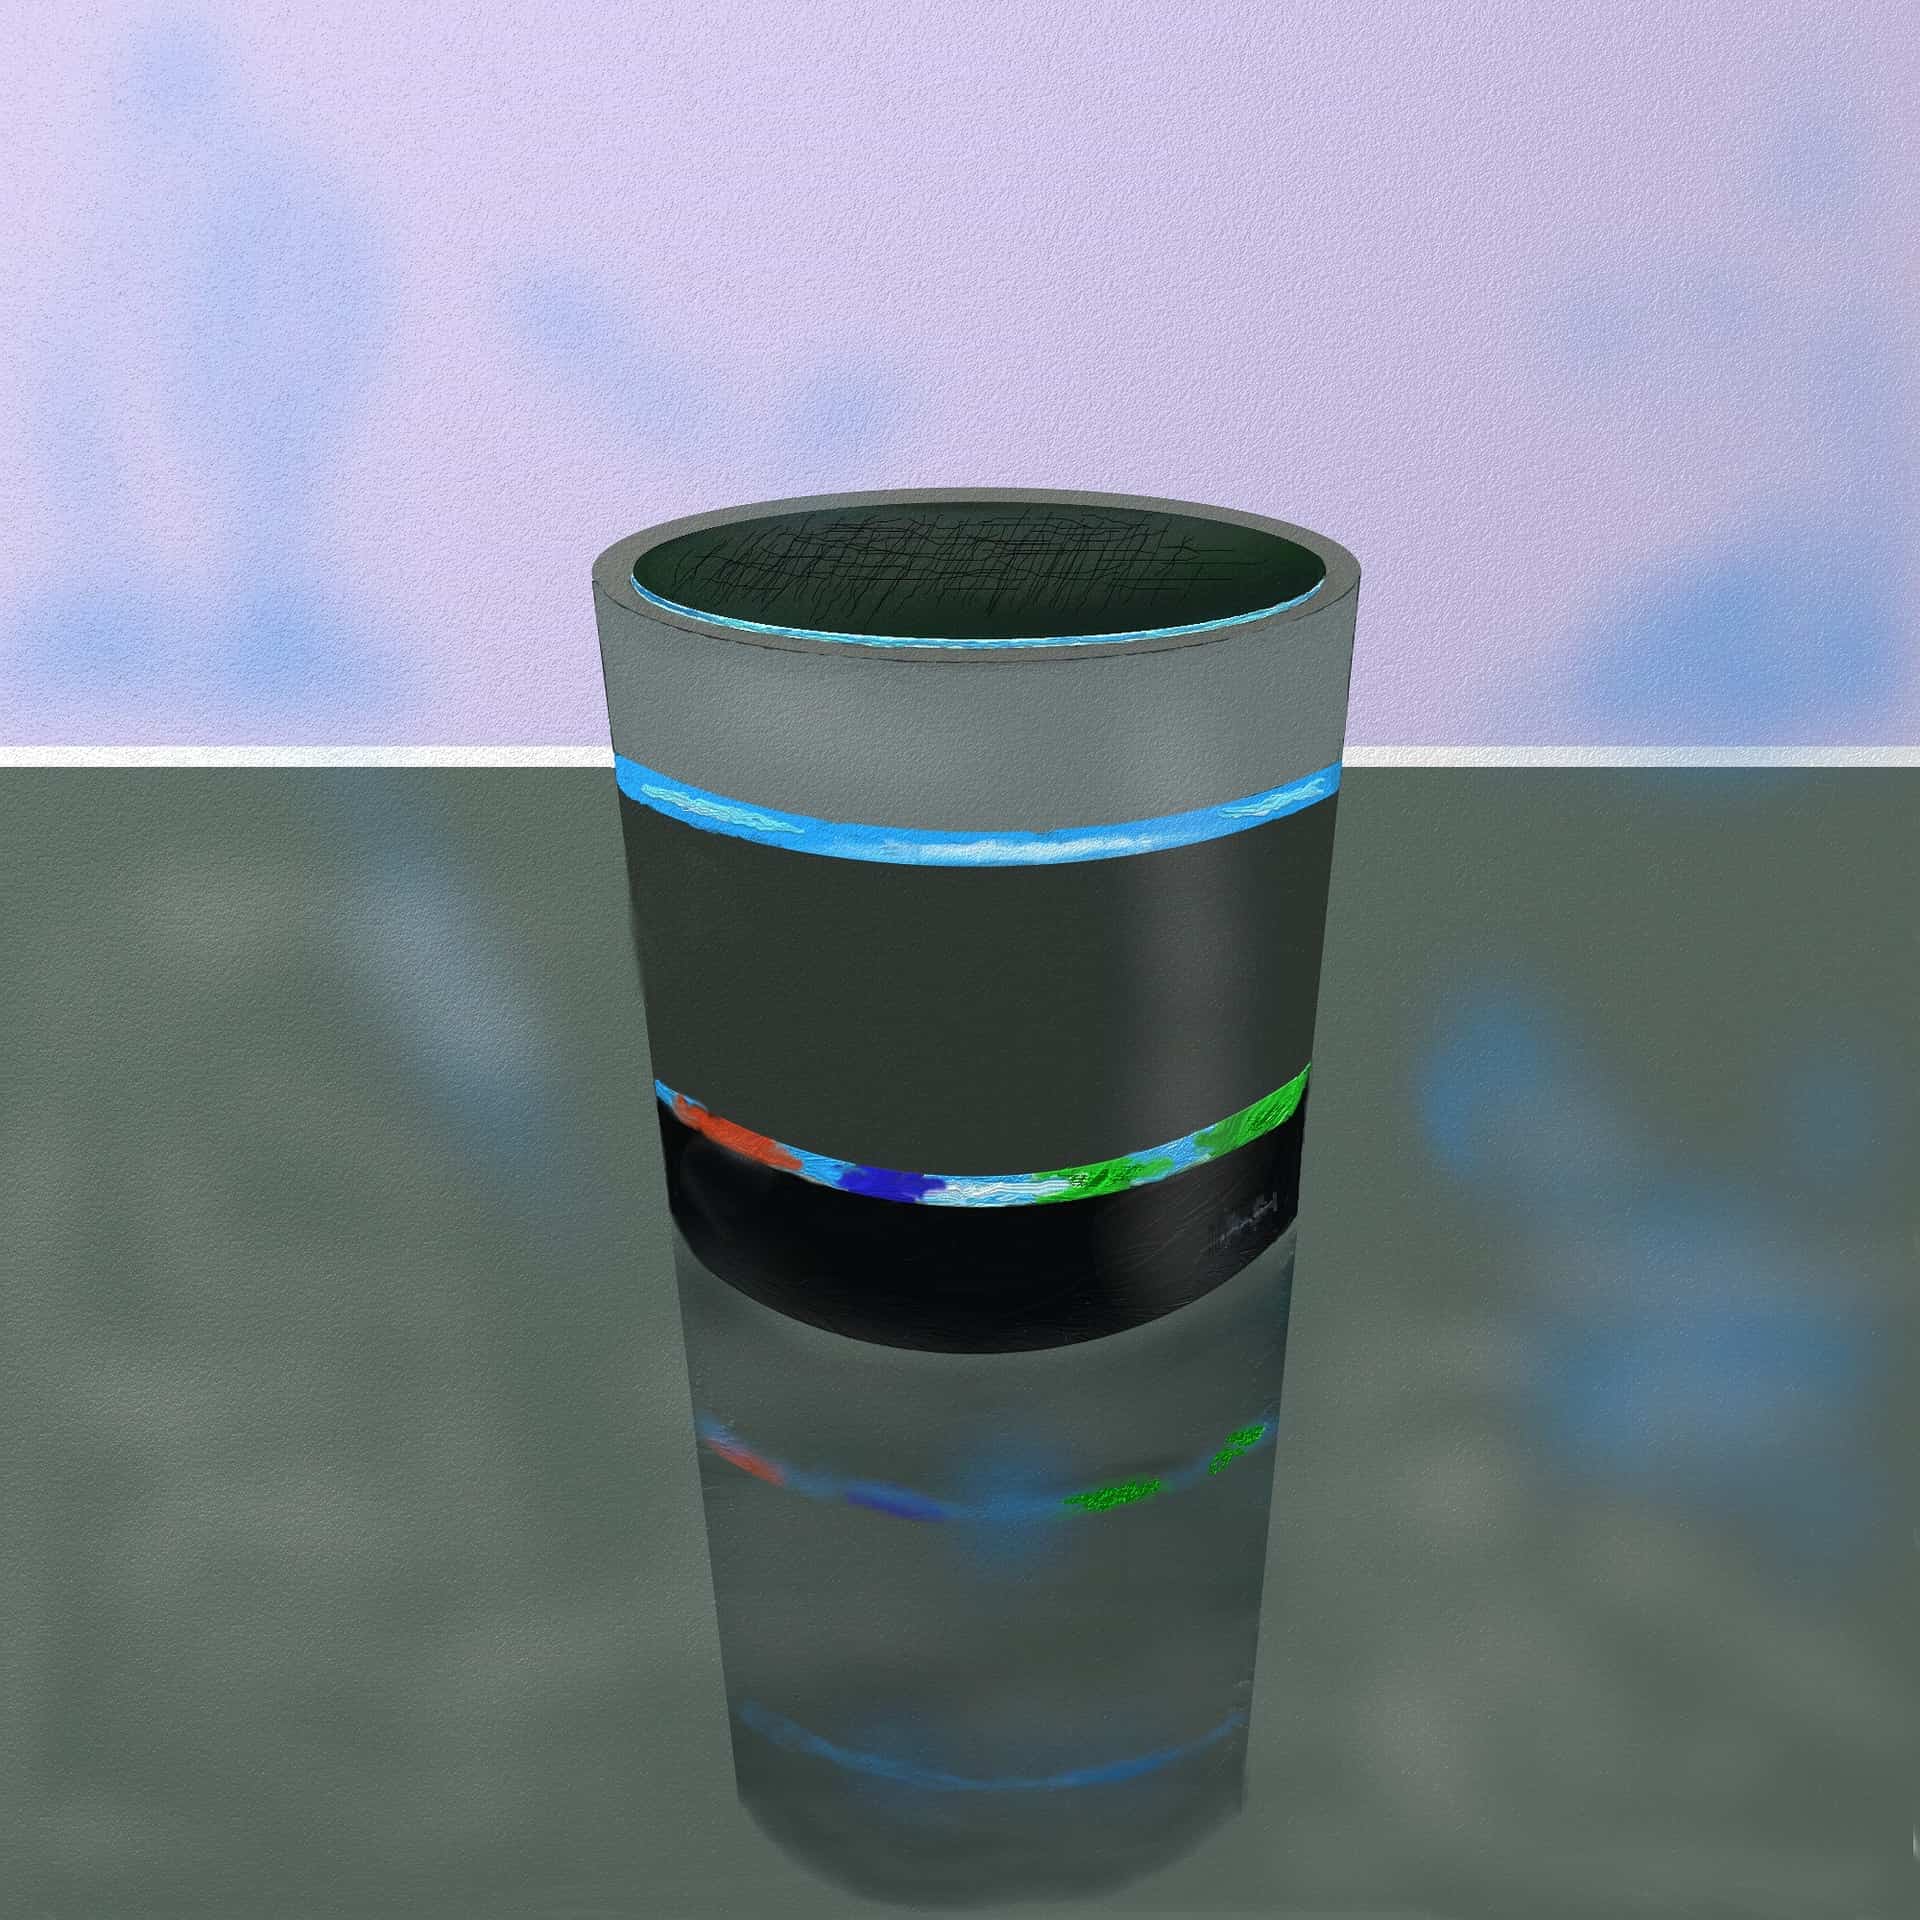 a colorful bluetooth speaker